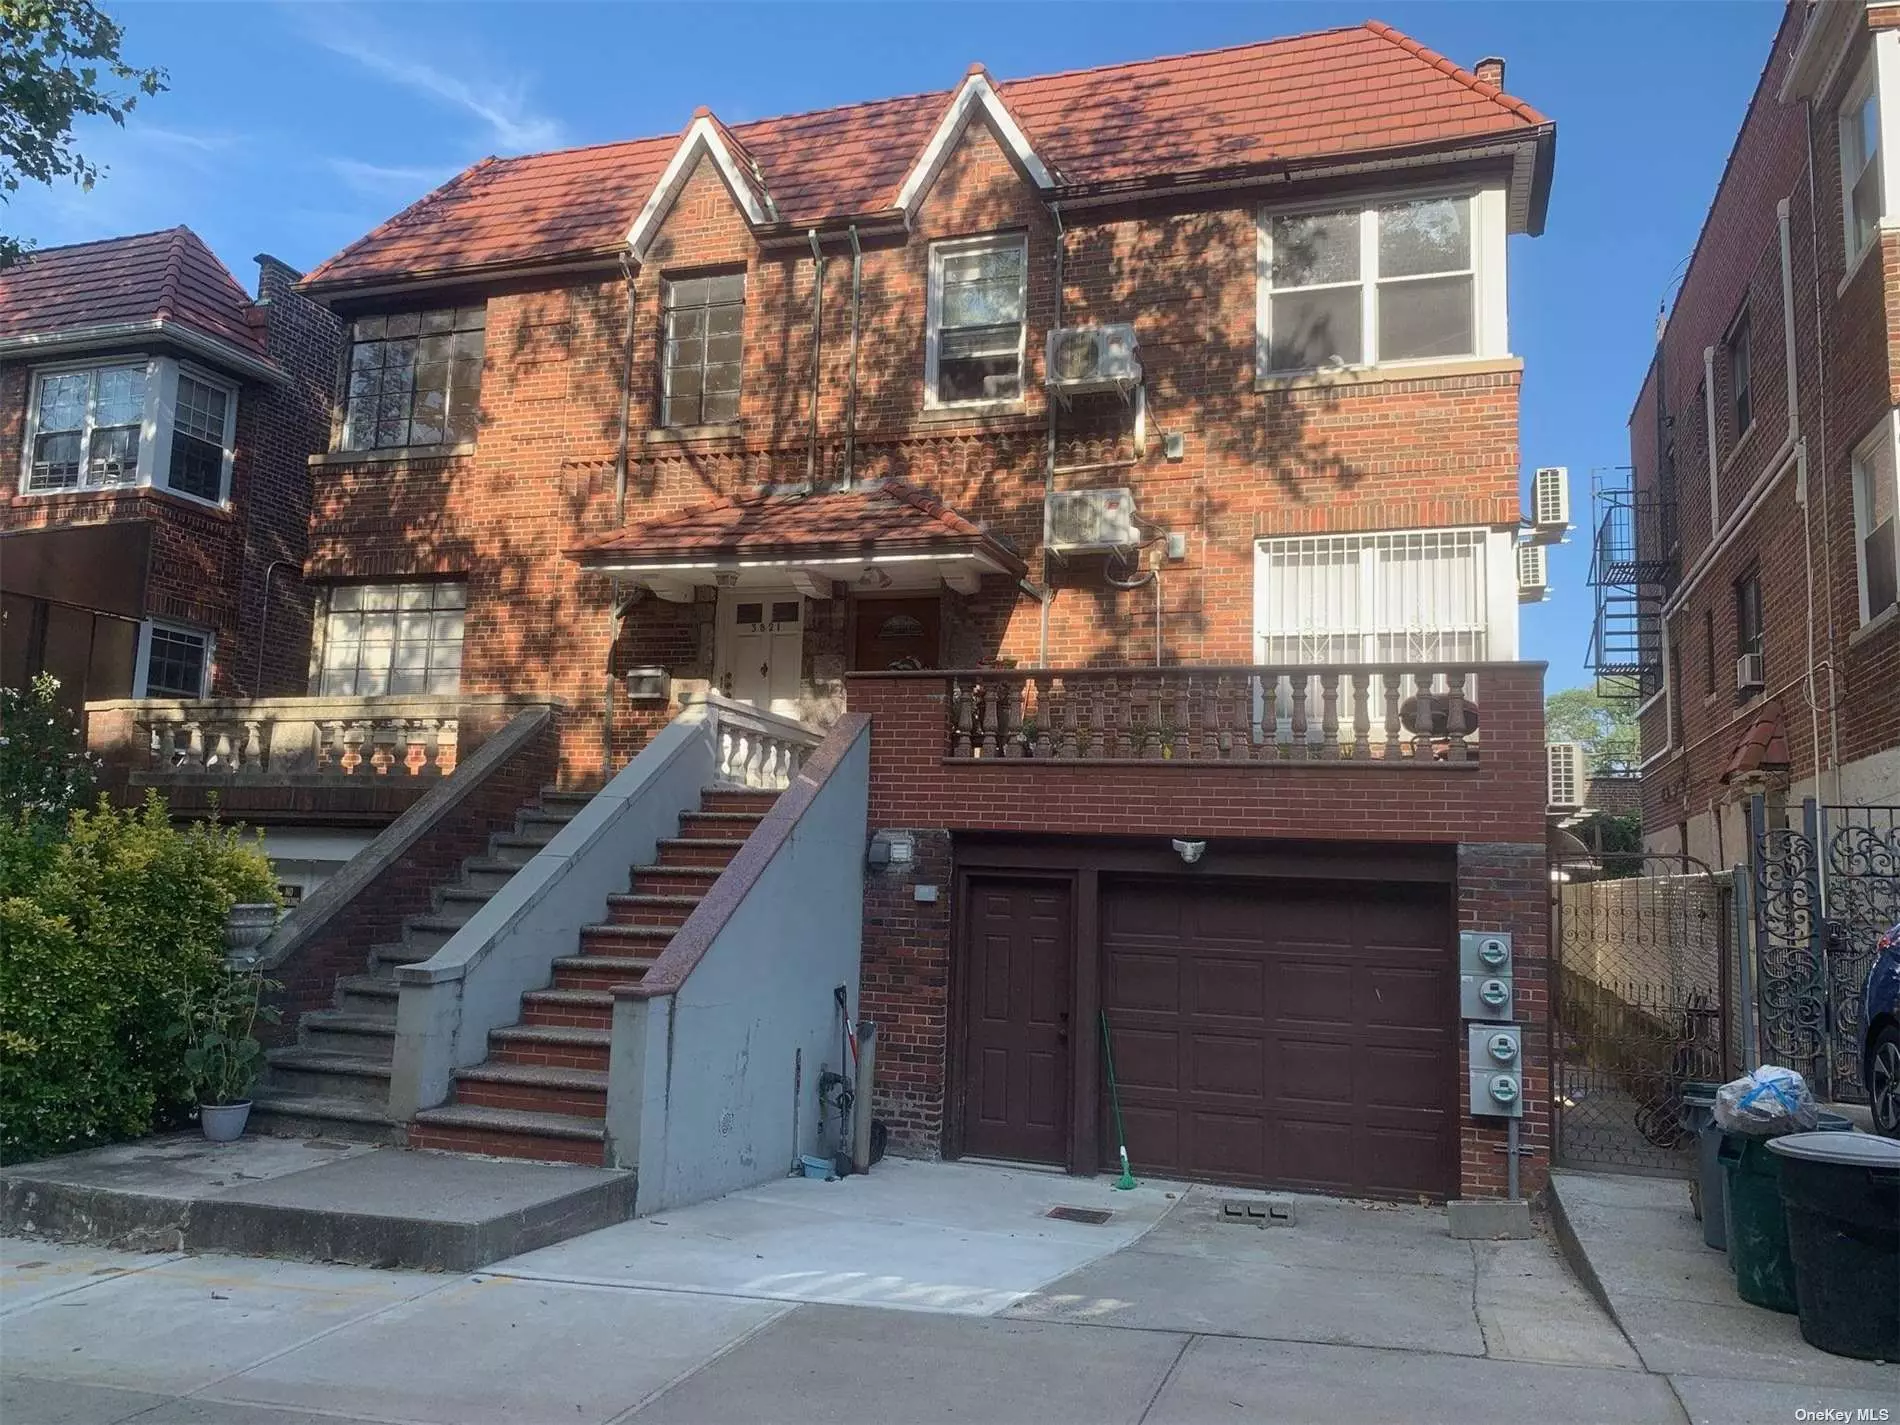 All Renovated Apartment With Wall Units Throughout. Separated Entrance-side of the house, walk directly into the apartment. Spacious 2 Bedrooms, 1 Bathroom, Many Closets.  Beautiful Tiled Floors Throughout.  Nice And Spacious Backyard. Parking Available With Additional Charge of 225 per month. All Pets Are Welcomed.